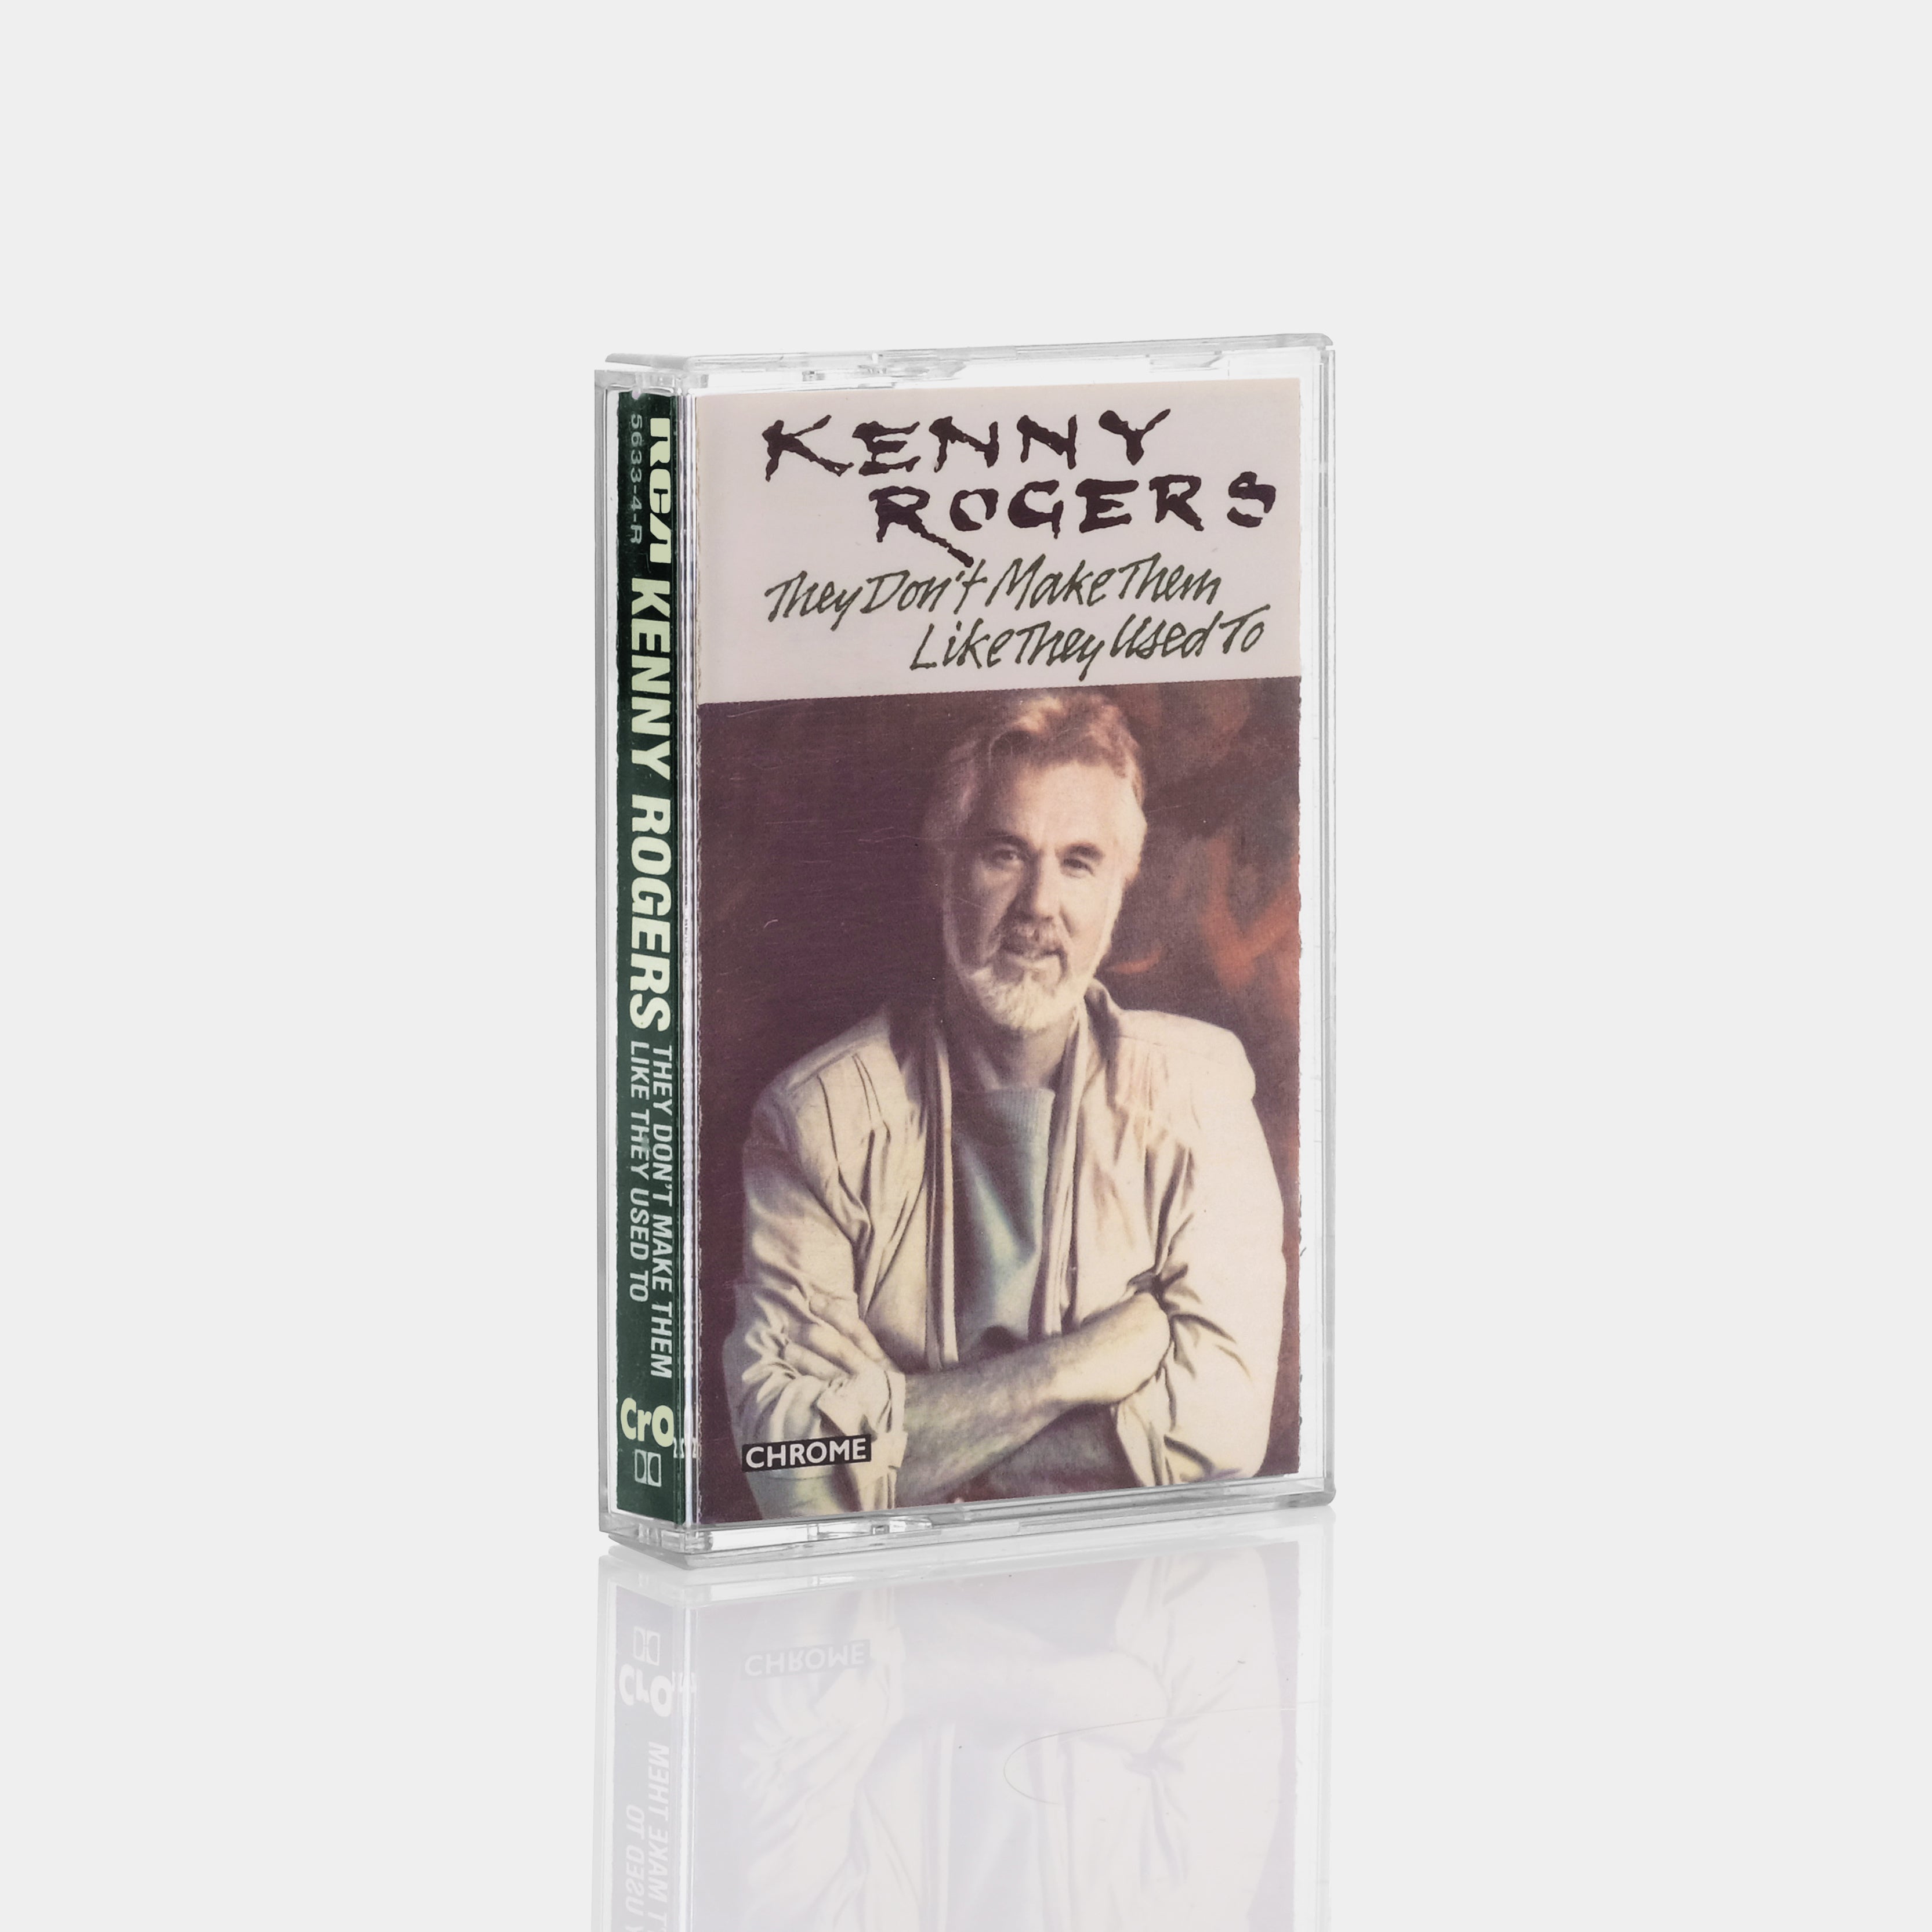 Kenny Rogers - They Don't Make Them Like They Used To Cassette Tape